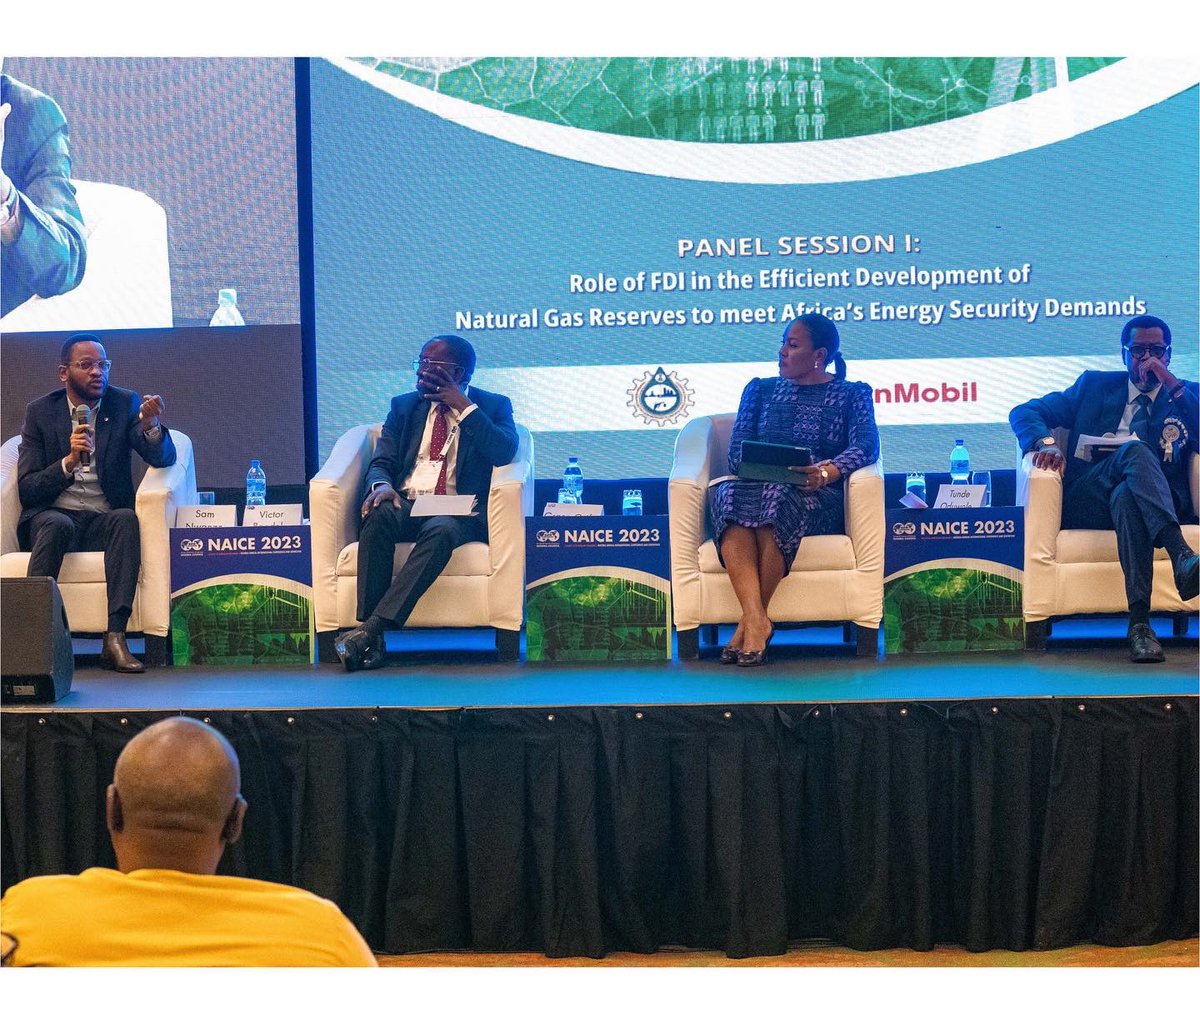 Sam Nwanze, the Executive Director/CFO @heirsoilandgas, speaking at the Society of Petroleum Engineers (SPE) Nigeria Annual International Conference and Exhibition (NAICE) 2023. During a panel session on